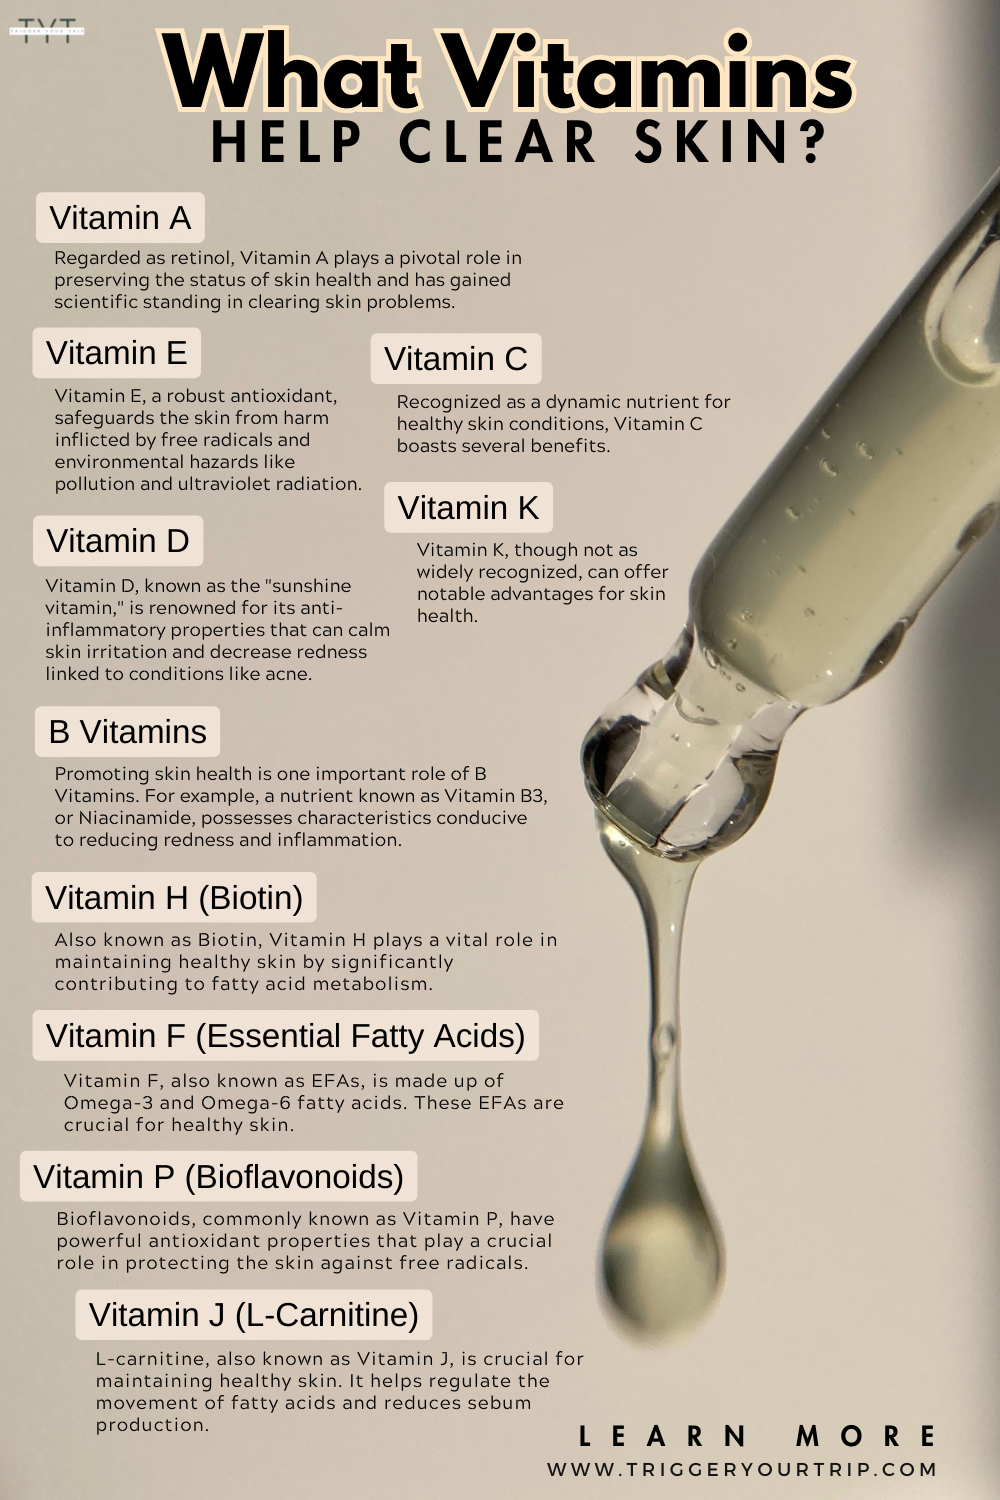 what vitamins help with skin aging, improve skin health and body temperature?